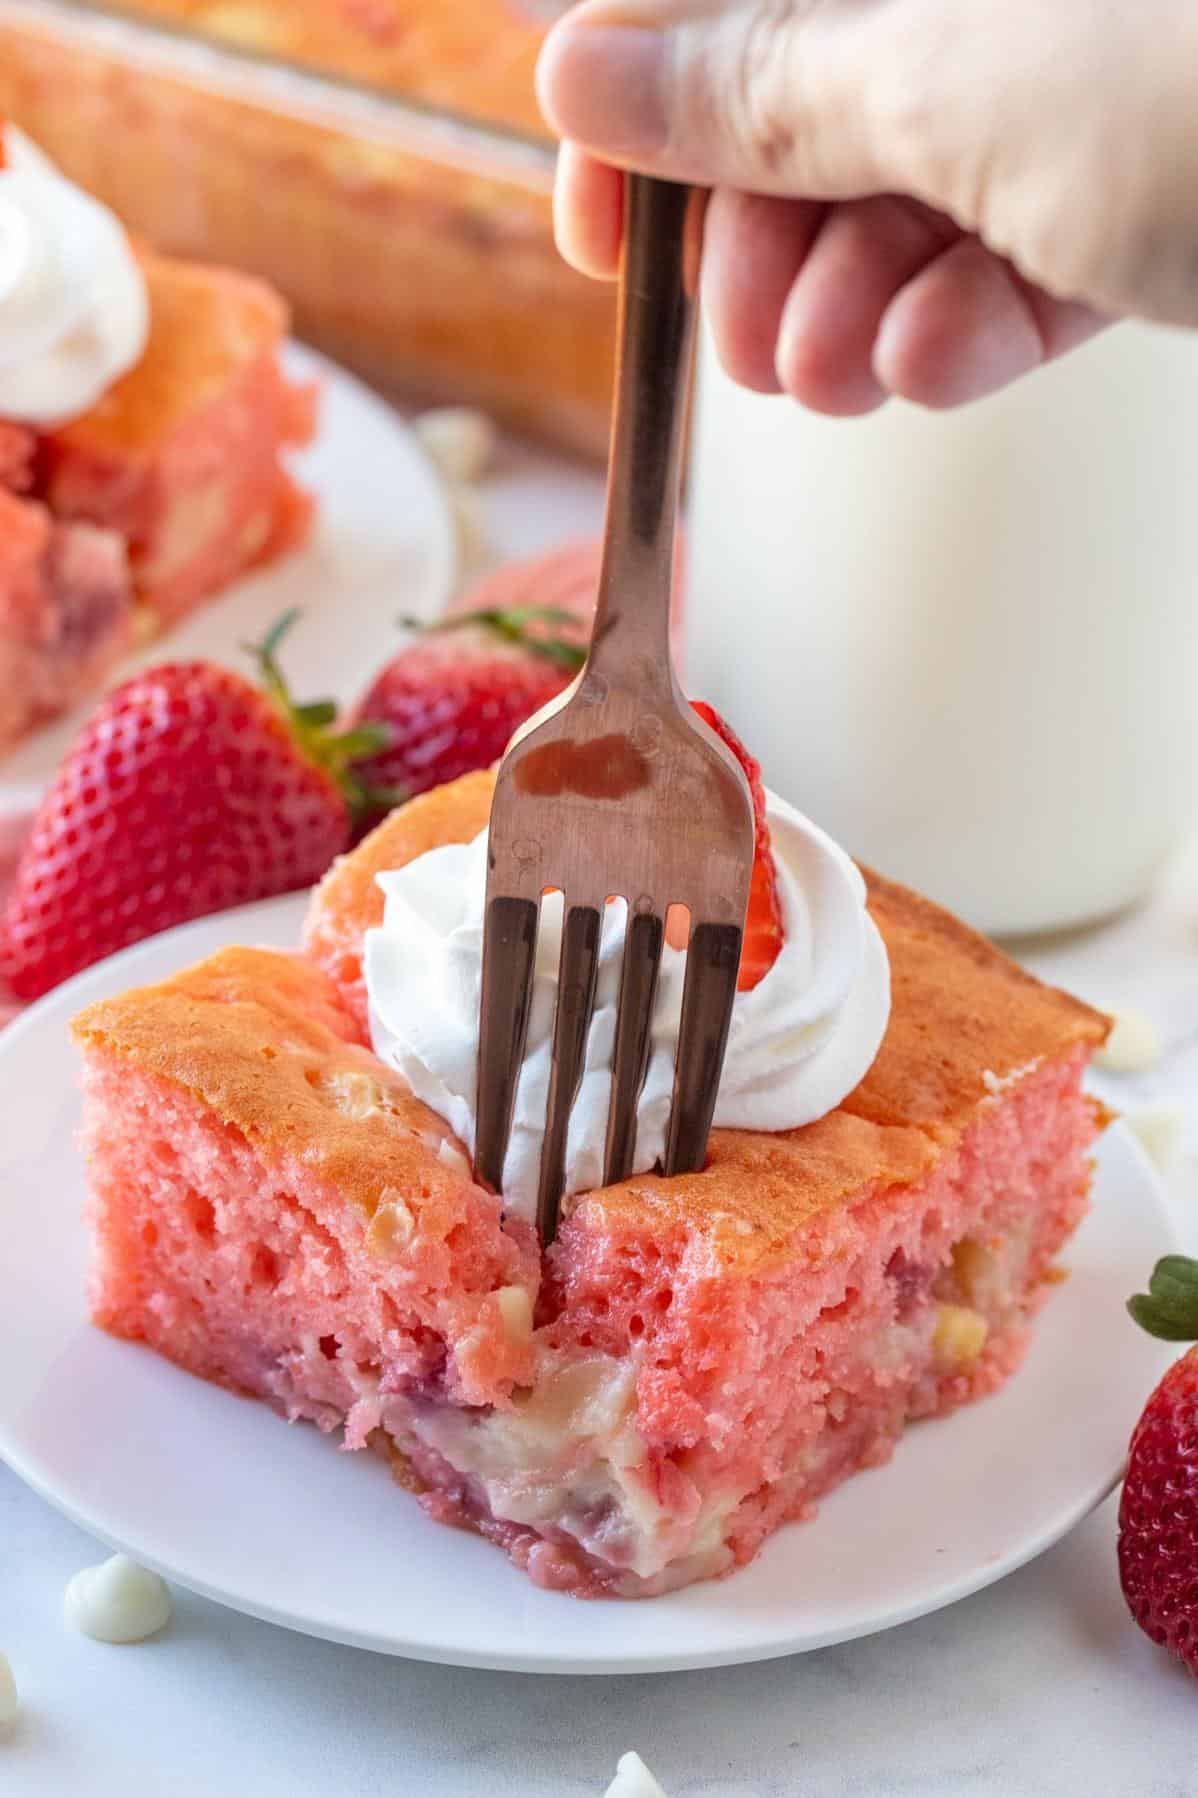  Sweet strawberries, cream cheese, and cake - it's a match made in heaven!